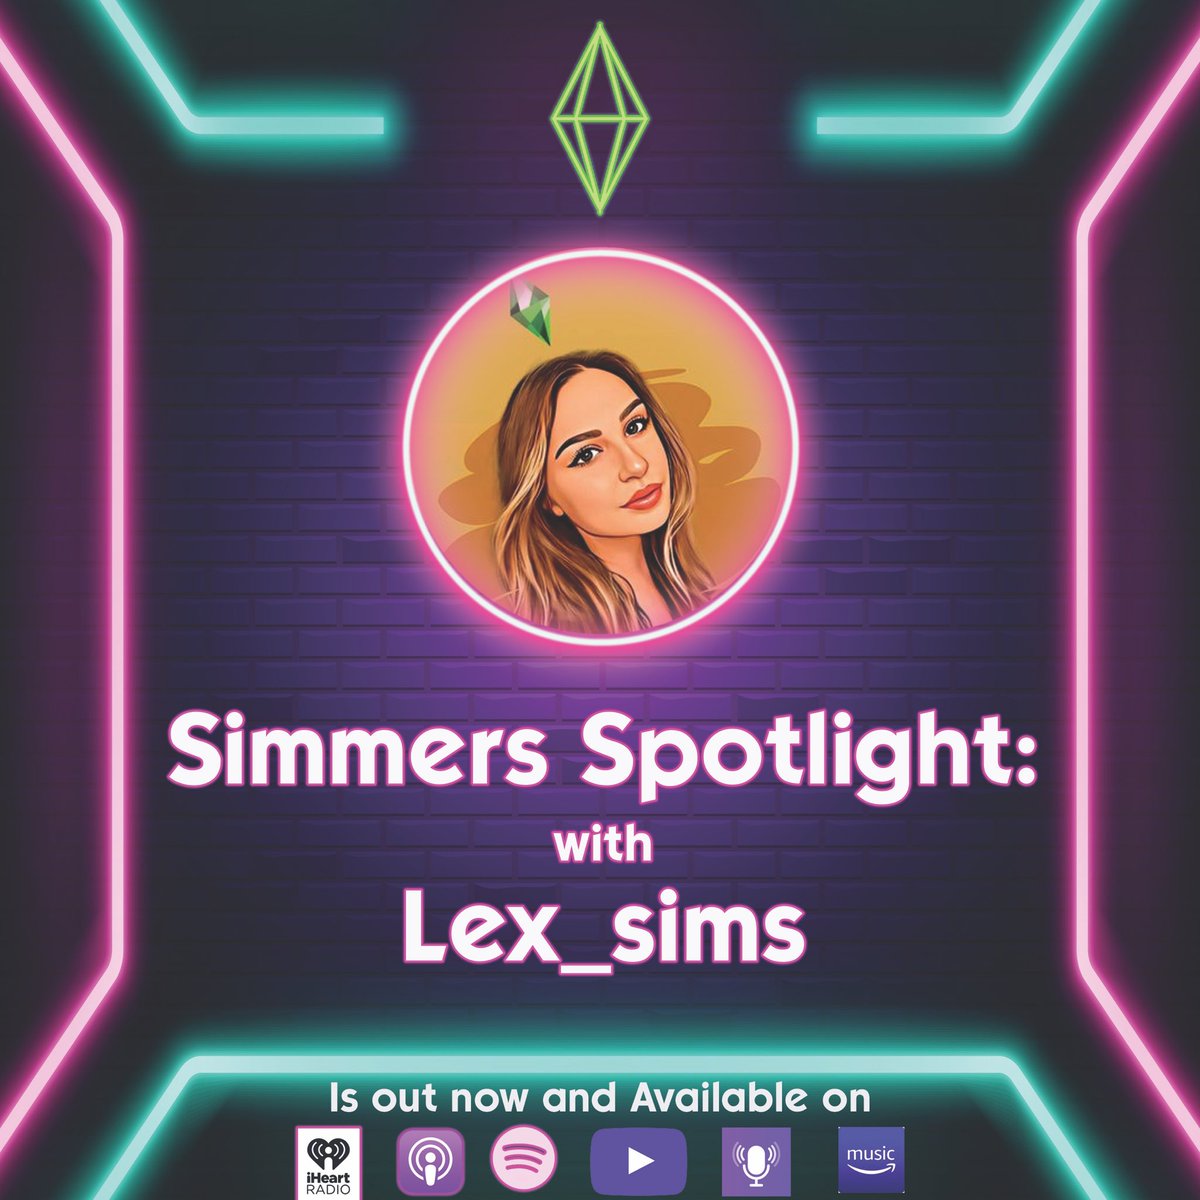 Come check out this this simmers spotlight with the talented Lex_sims!

#sims #thesims #sims4 #cafe #simstagram #nocc #simstagrammer #simmer #story #roleplay #simsta #life #legacy #simsstory #game #house #simslife #build #sims4 ea #basegamebuild #sim #simstory #family #simblr